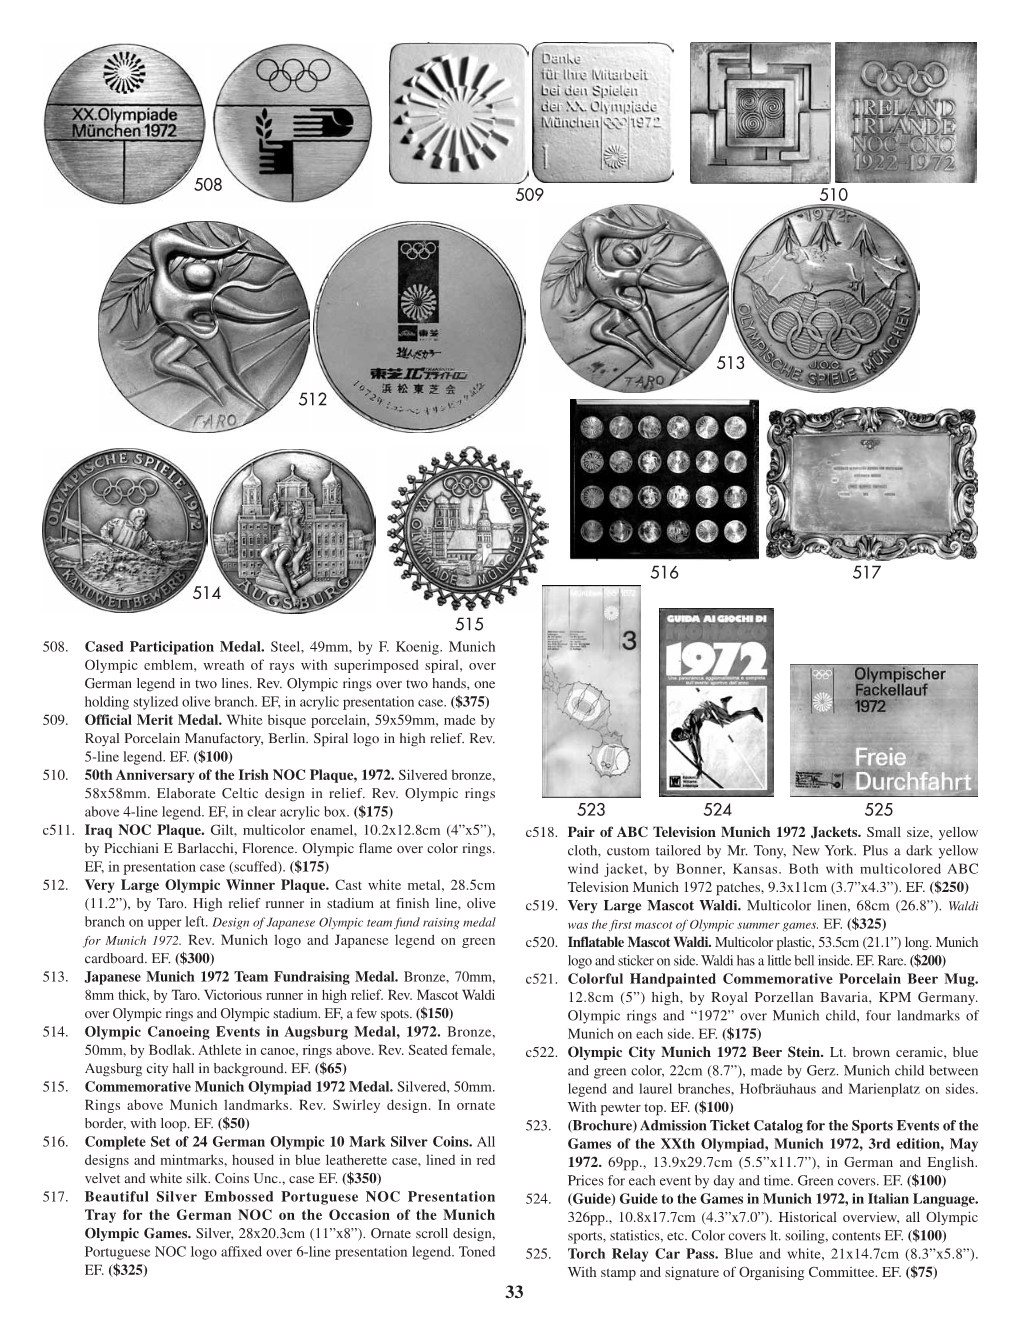 508. Cased Participation Medal. Steel, 49Mm, by F. Koenig. Munich Olympic Emblem, Wreath of Rays with Superimposed Spiral, Over German Legend in Two Lines